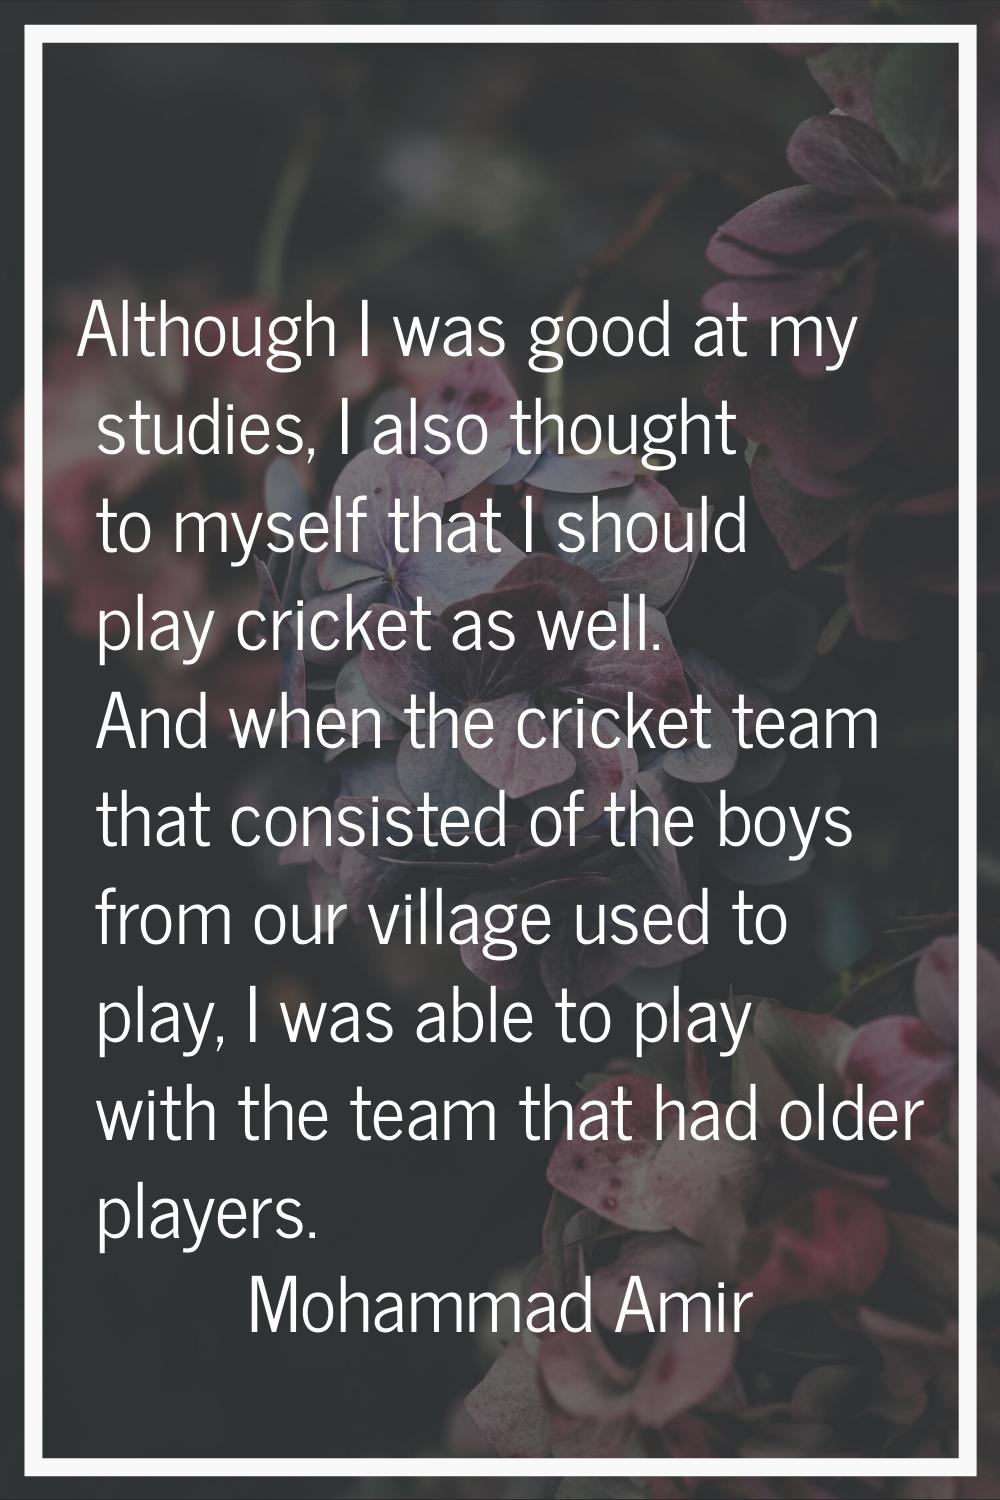 Although I was good at my studies, I also thought to myself that I should play cricket as well. And